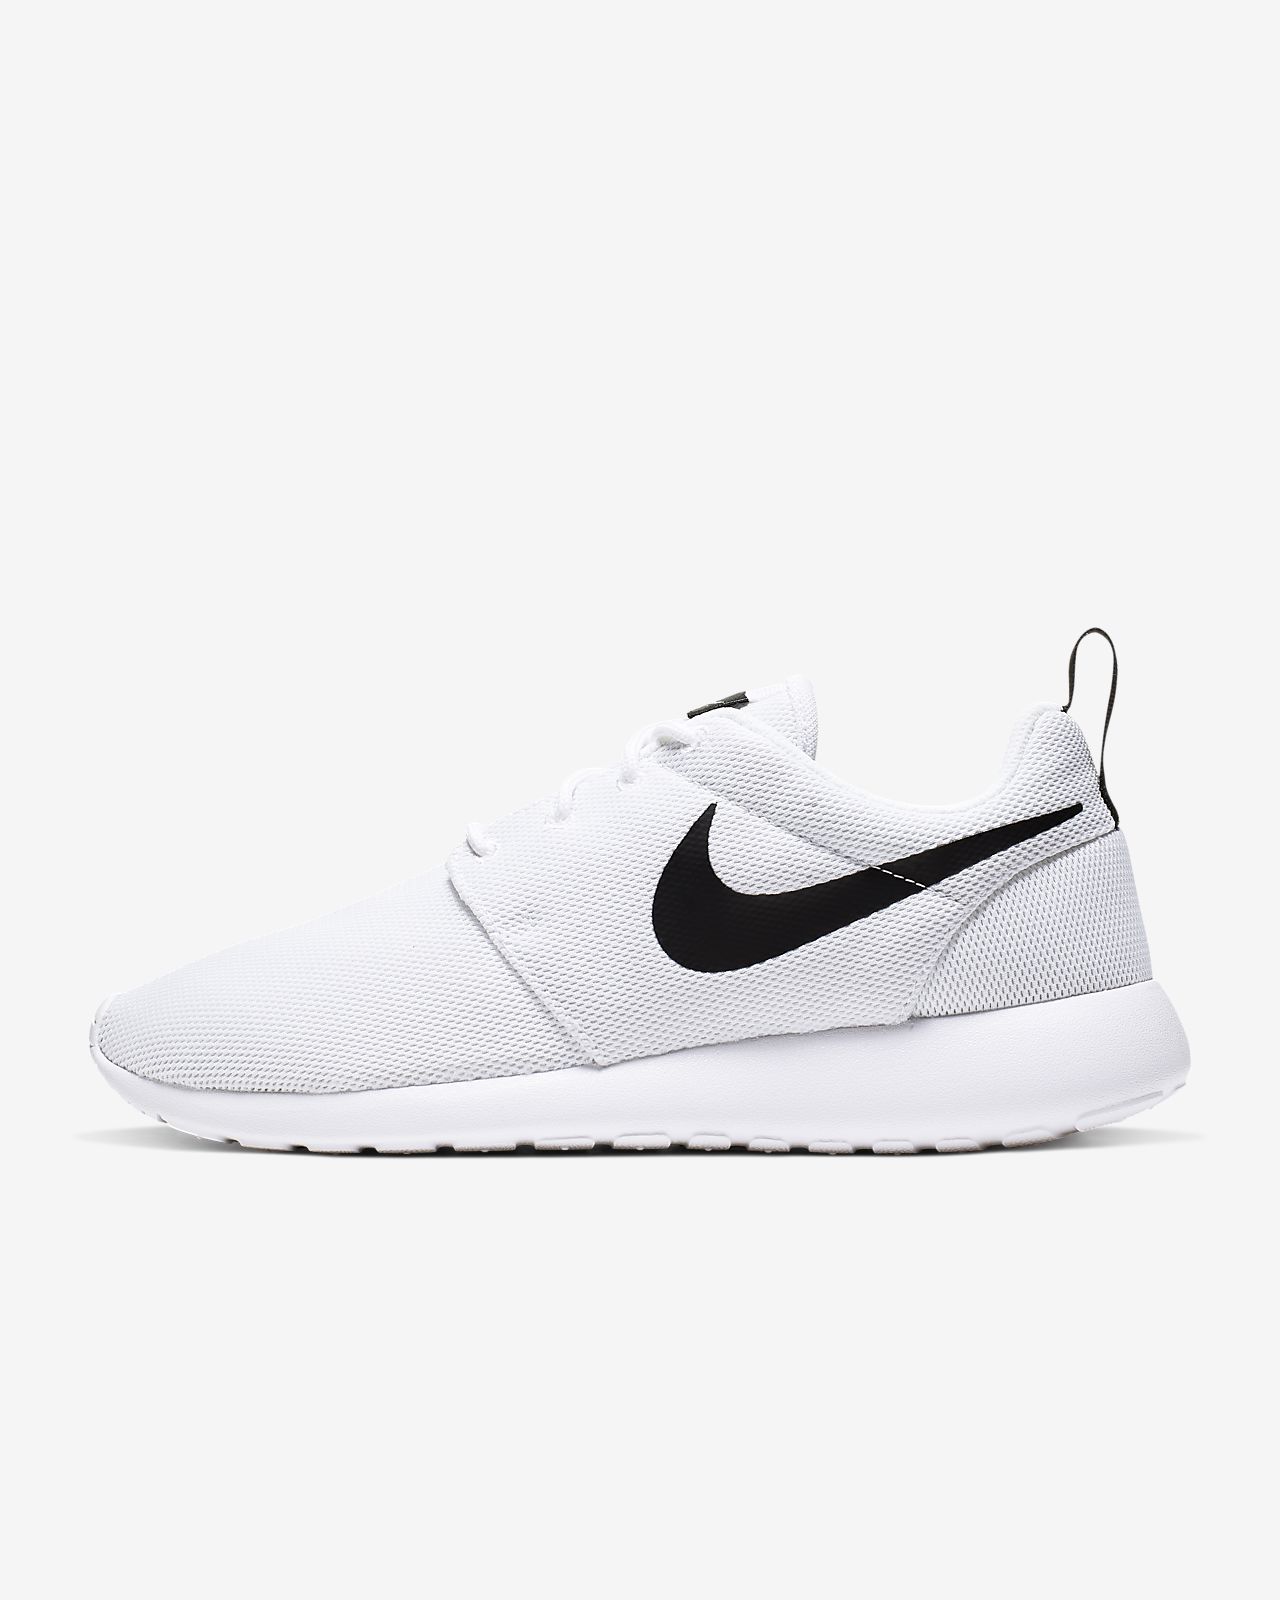 nike roshes woman